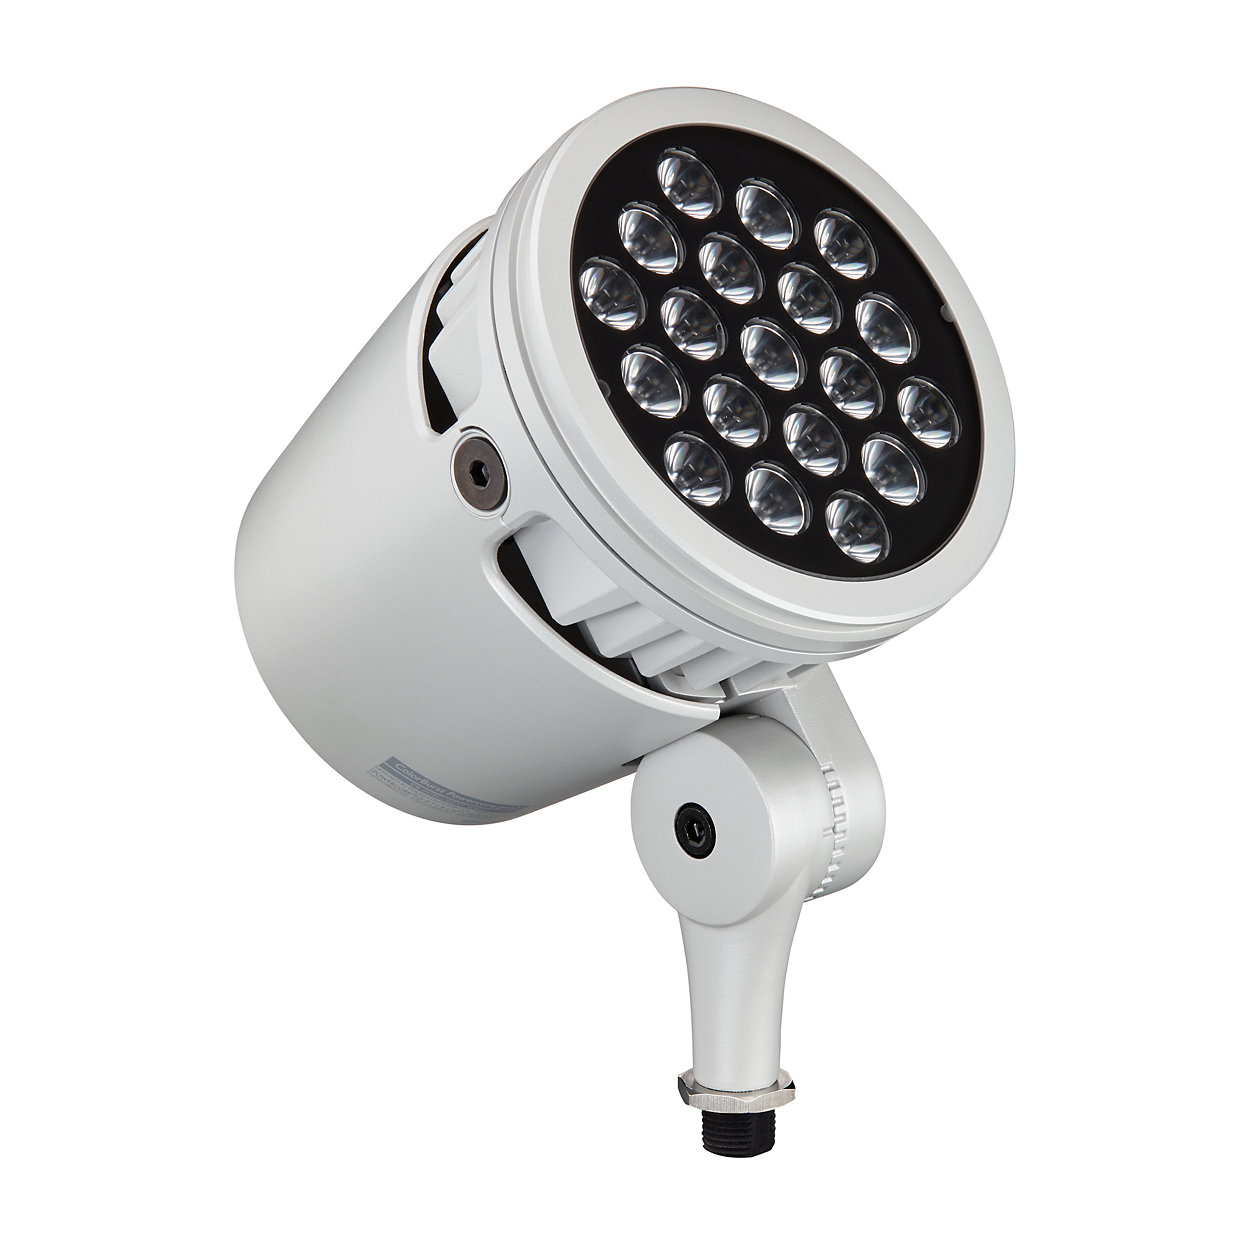 Architectural LED spotlight with intelligent colour light